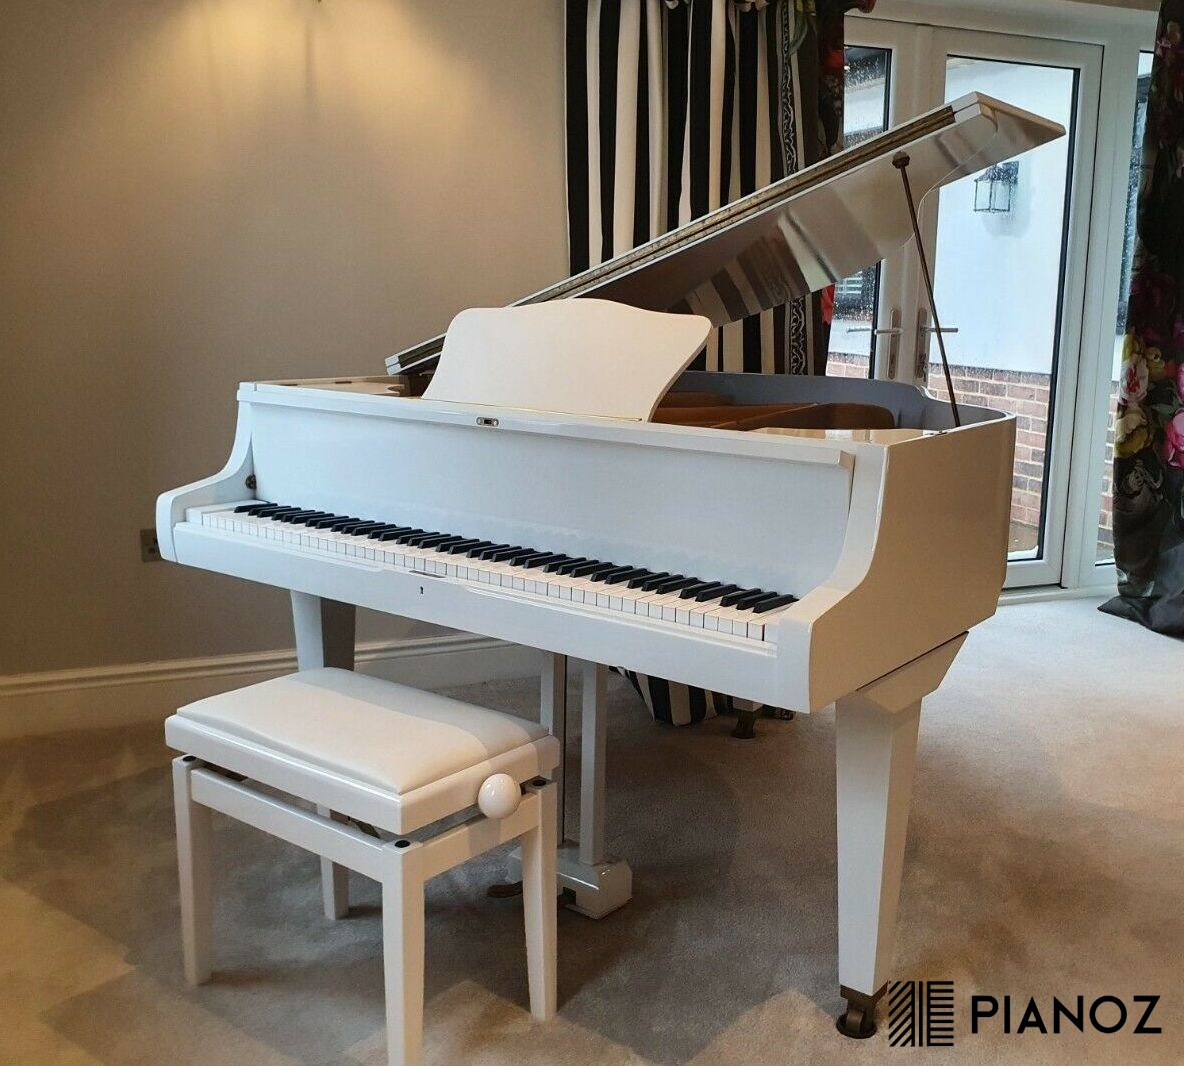 Zimmermann White Baby Grand Piano piano for sale in UK